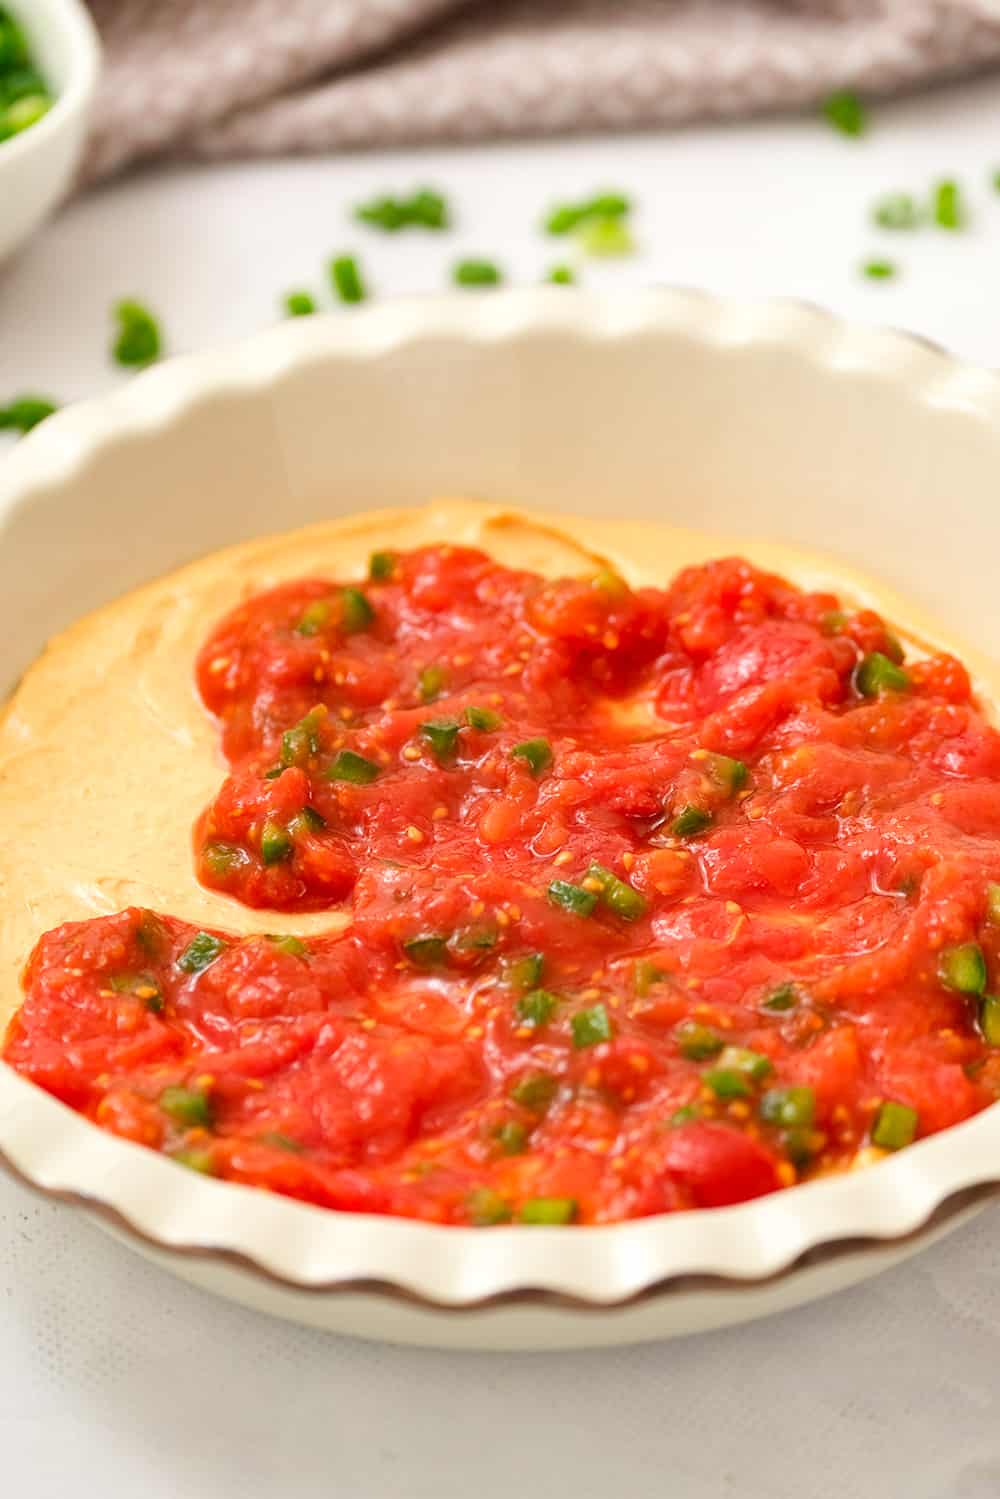 Salsa layered on cream cheese layer for taco dip